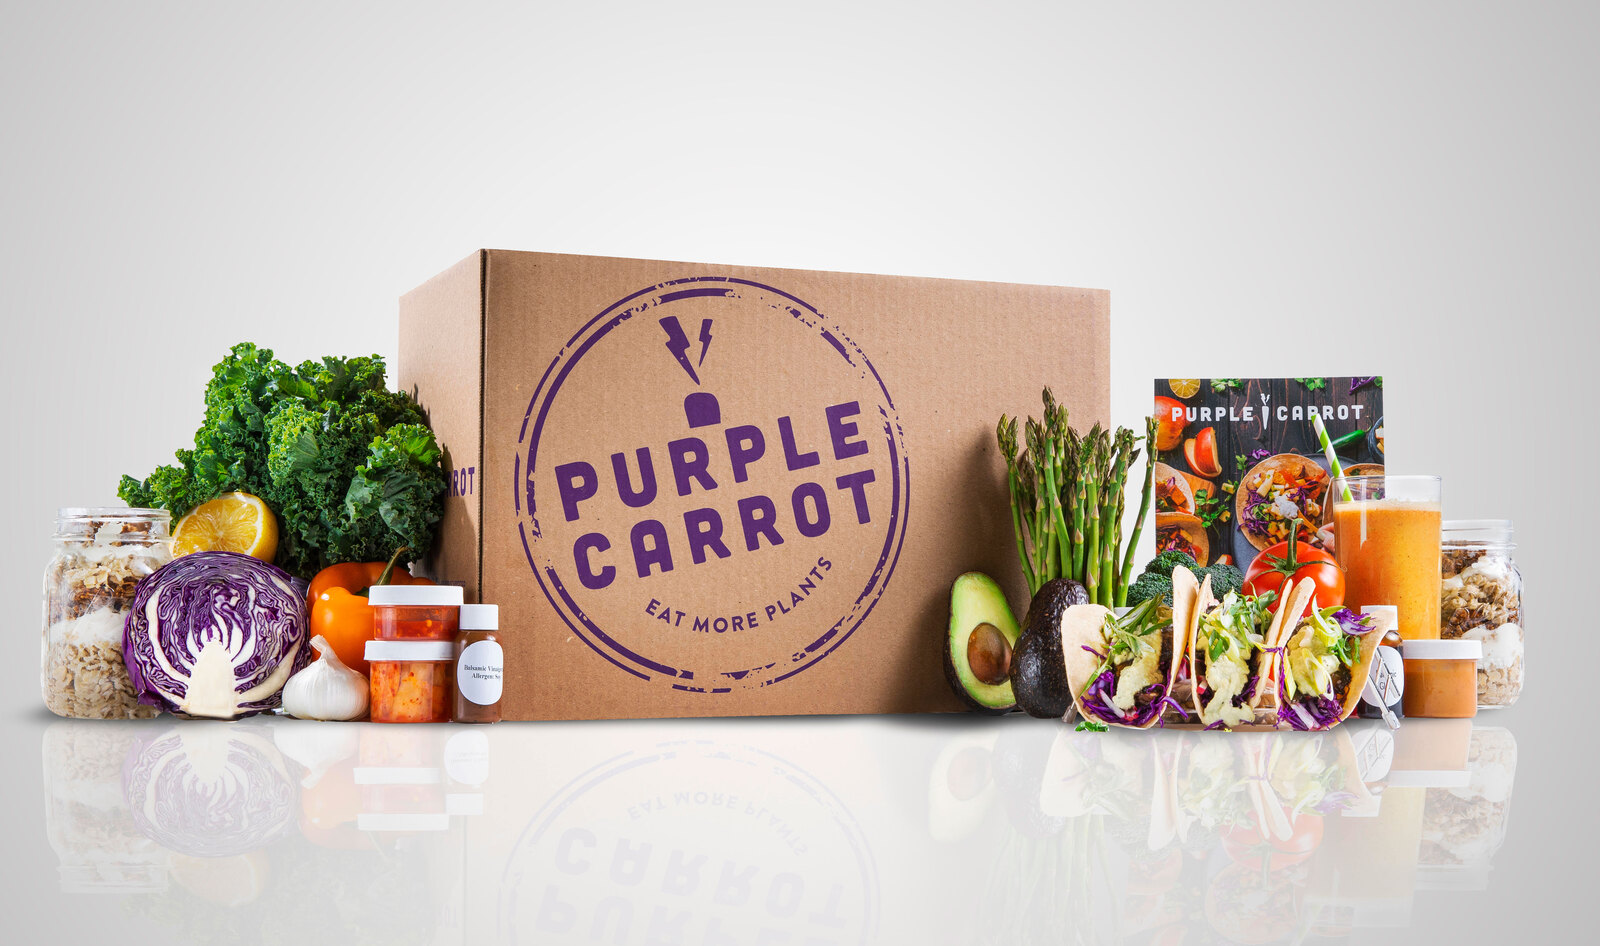 Vegan Meal Kit Brand Purple Carrot Debuts Launch Pad to Accelerate Growth of Plant-Based Startups